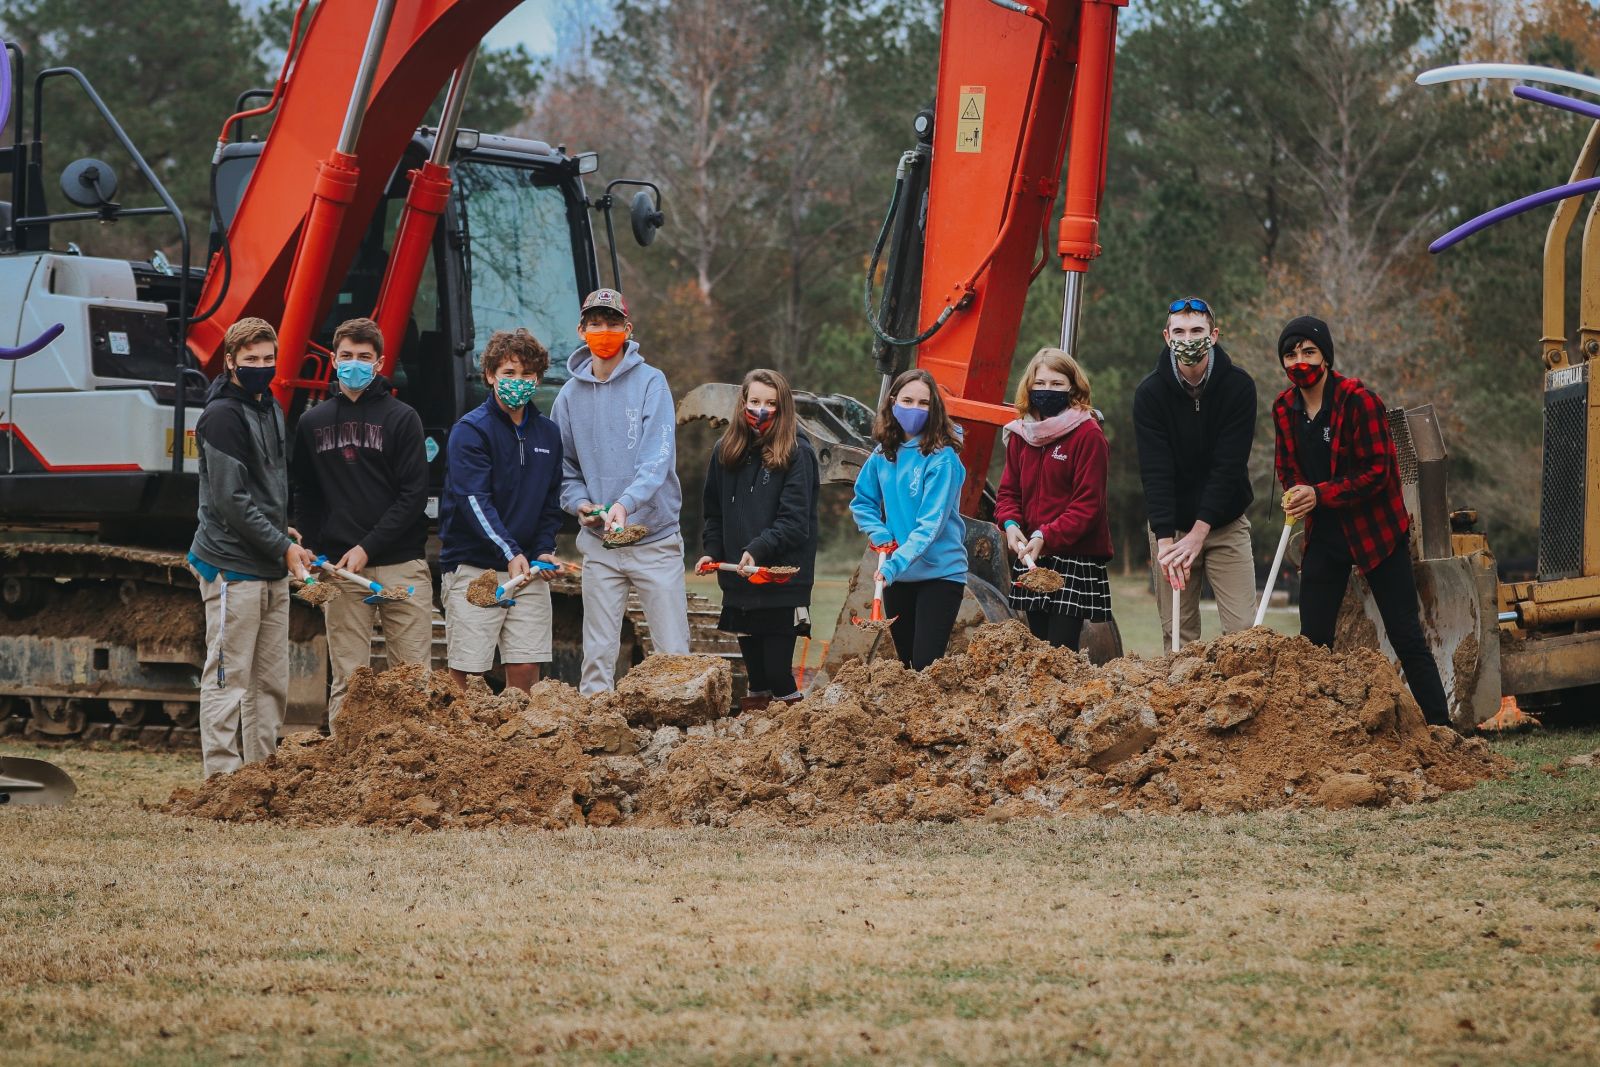 Students at the Sandhills School took part in a December 2020 groundbreaking for a $2.1 million expansion. (Photo/Provided)